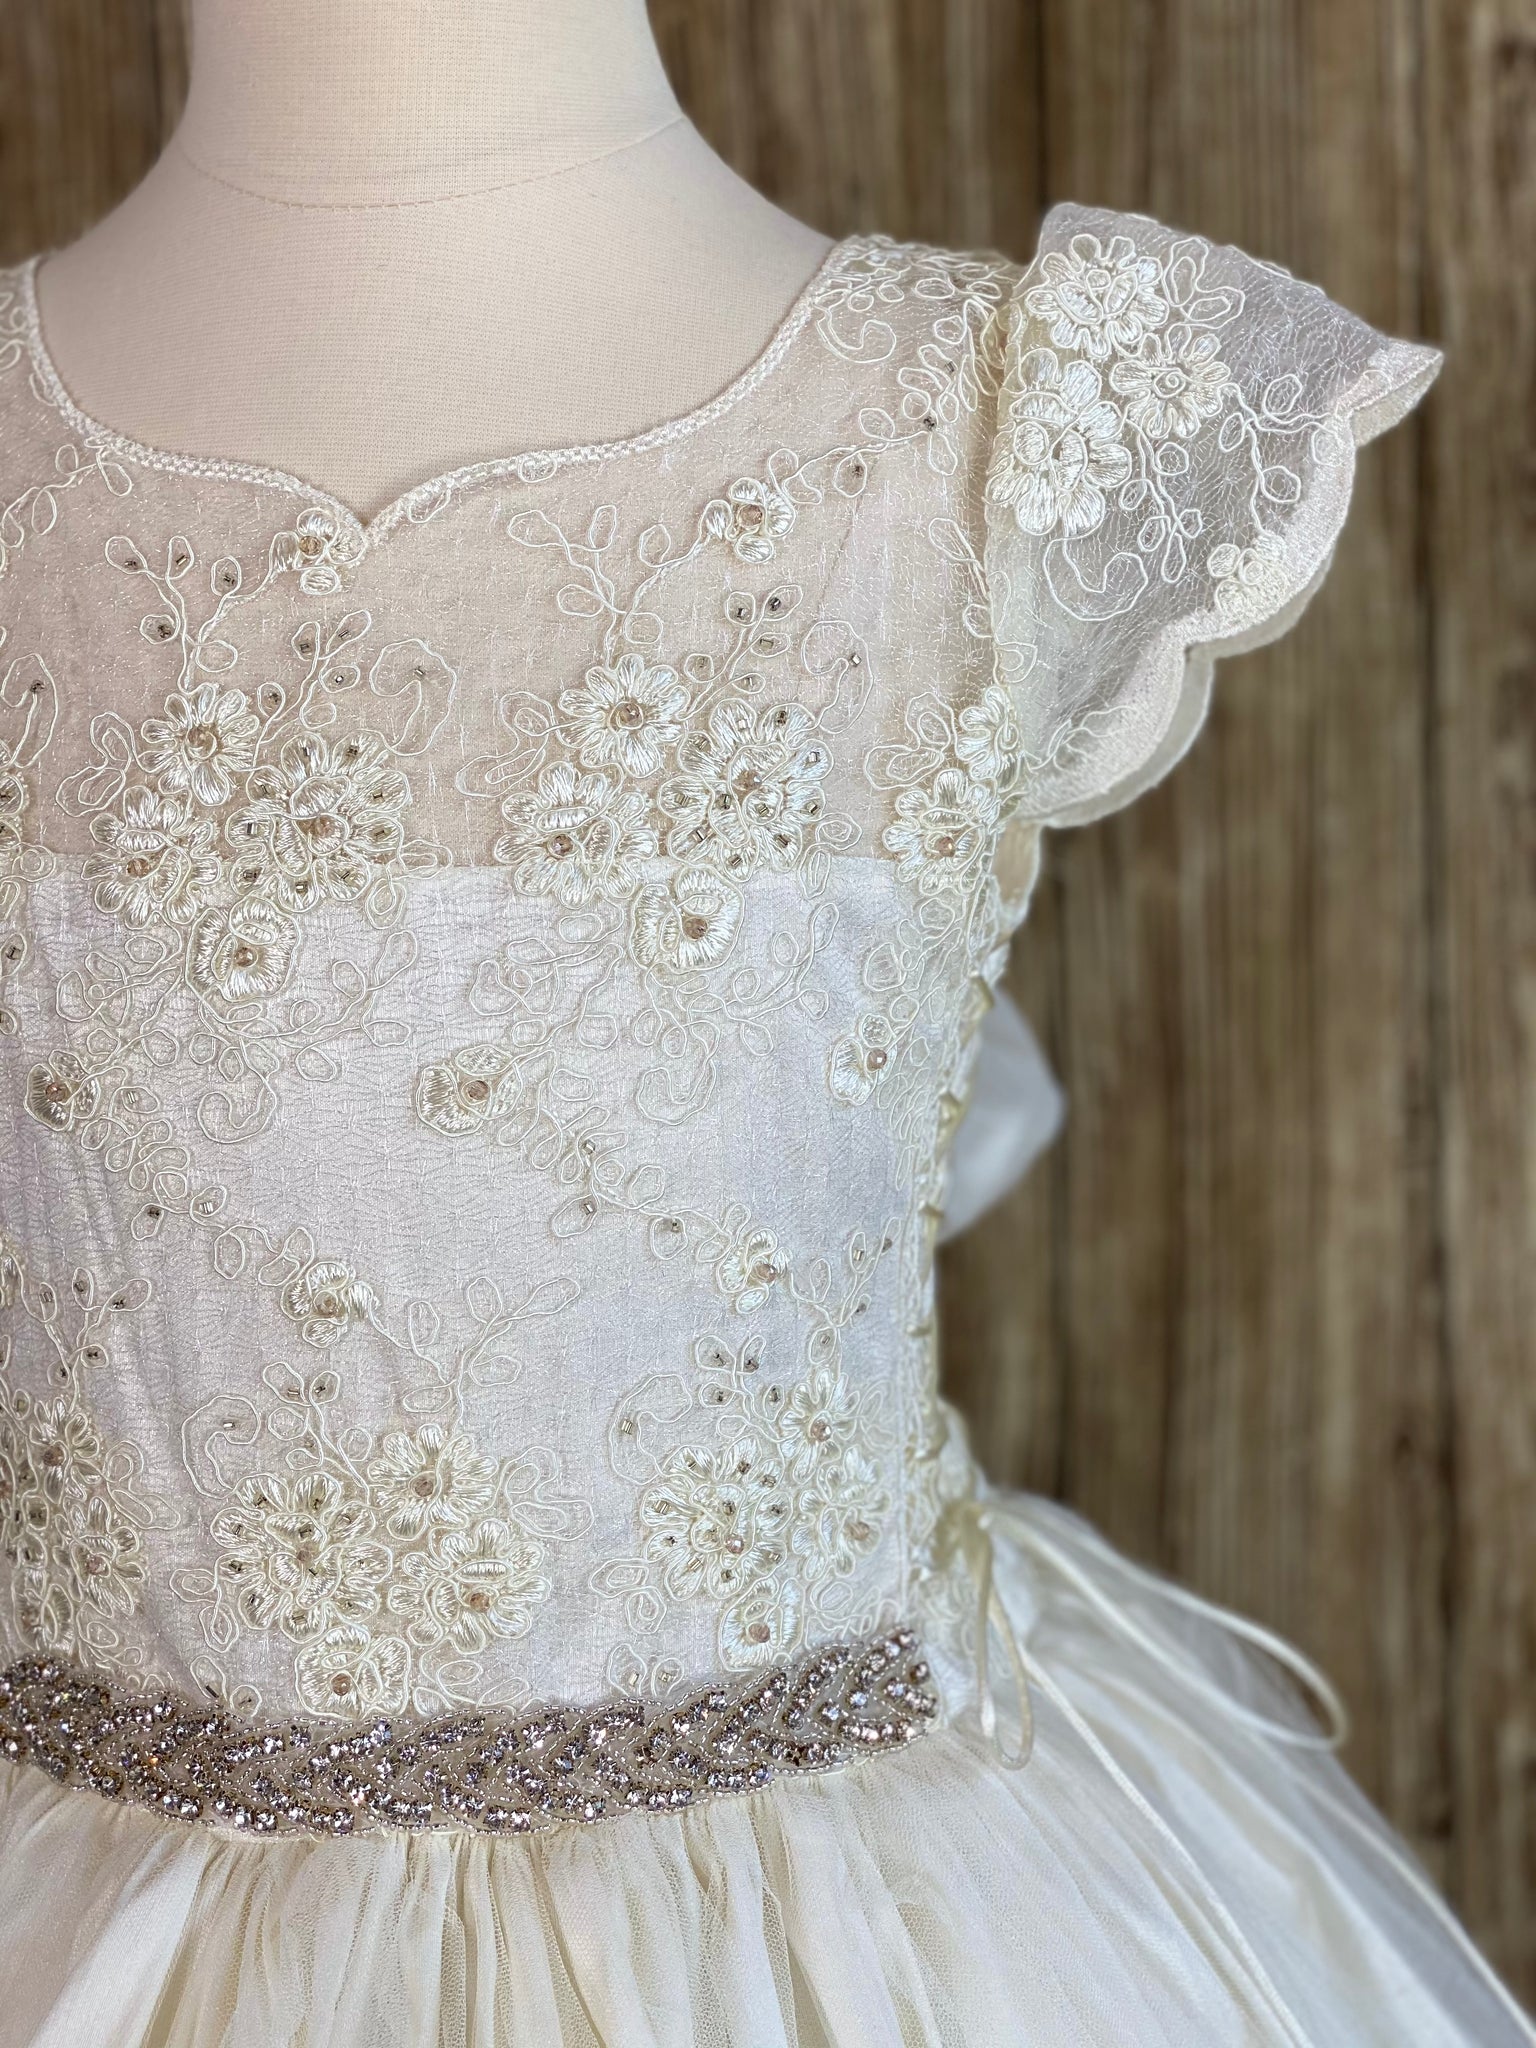 Ivory, size 10 Scalloped cap sleeve Ivory embroidered lace along illusion bodice and sleeve Elegant rhinestone band along lower bodice Gathered tulle skirt Corset closures on right and left underarms Ivory pearl button closure Ivory satin ribbon for large bow